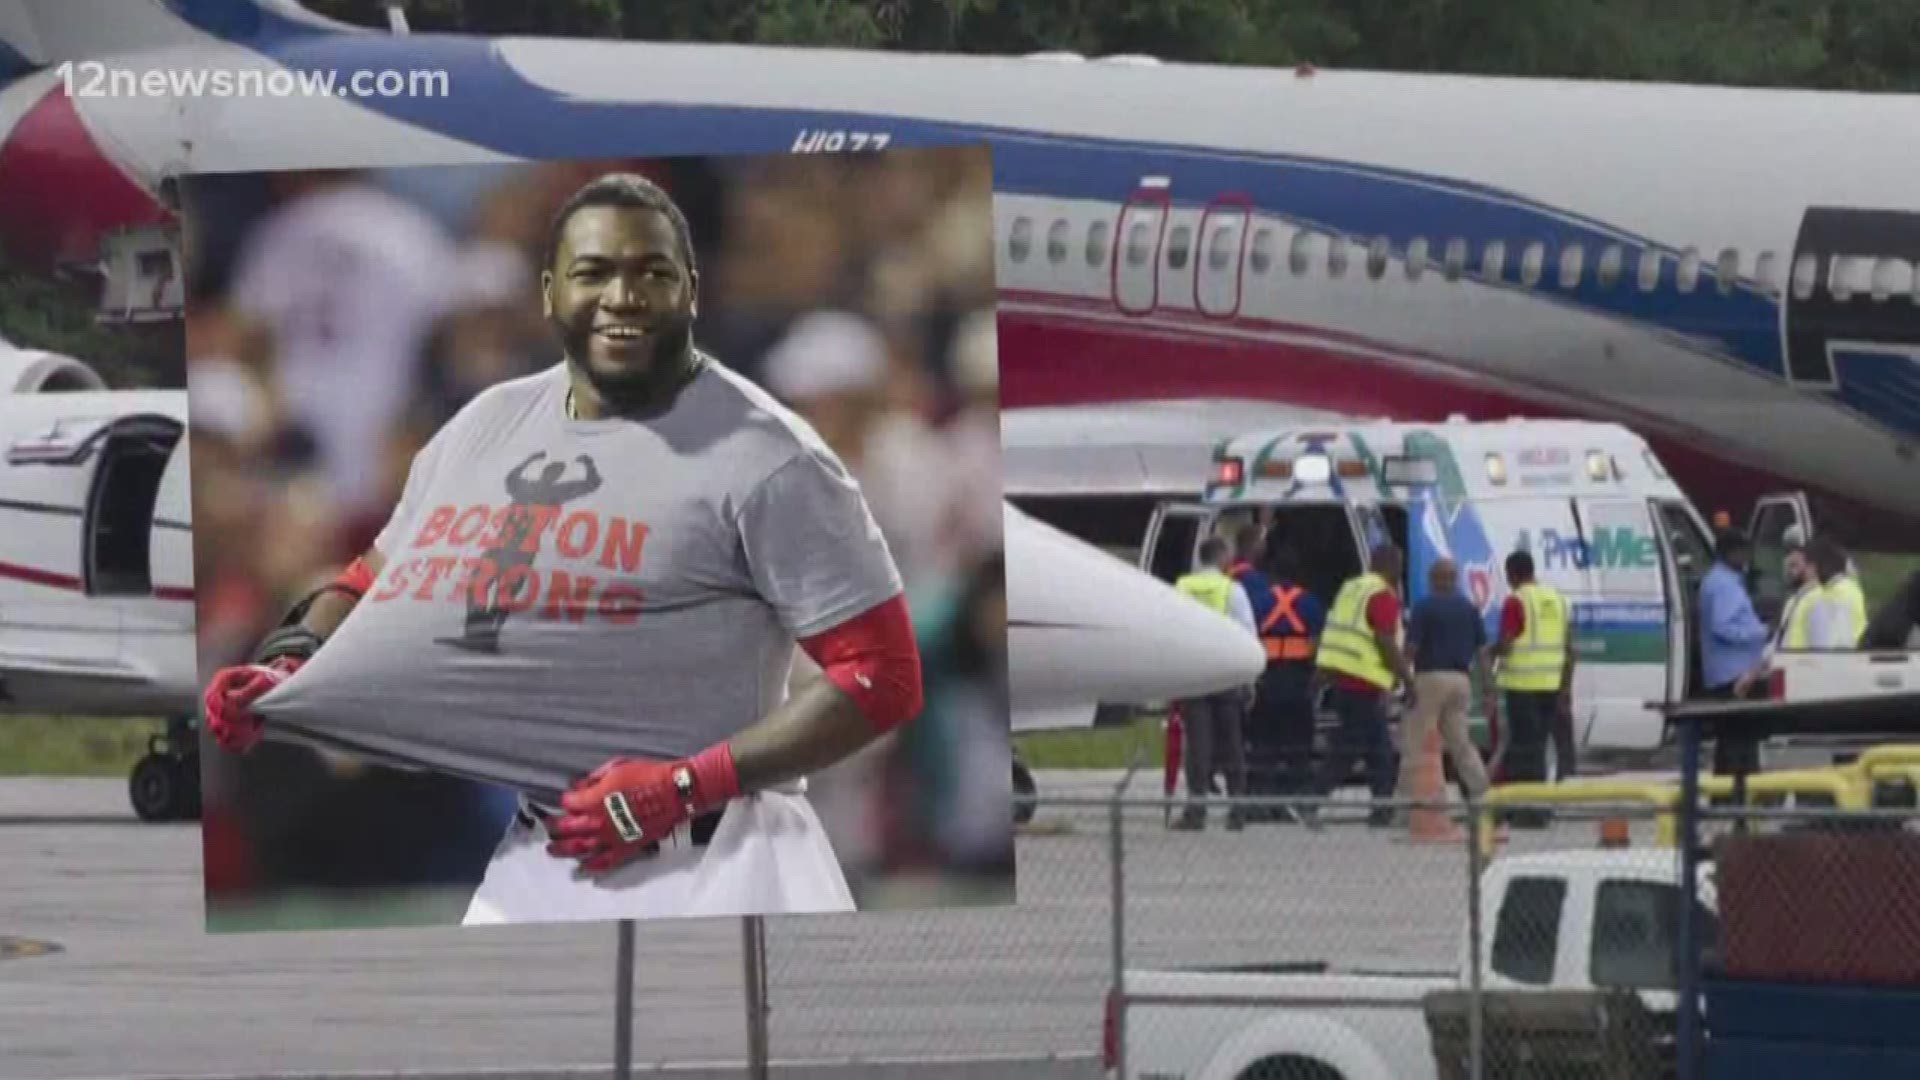 The man affectionately known as Big Papi was flown to Boston's Mass General Monday night on a Red Sox team plane.